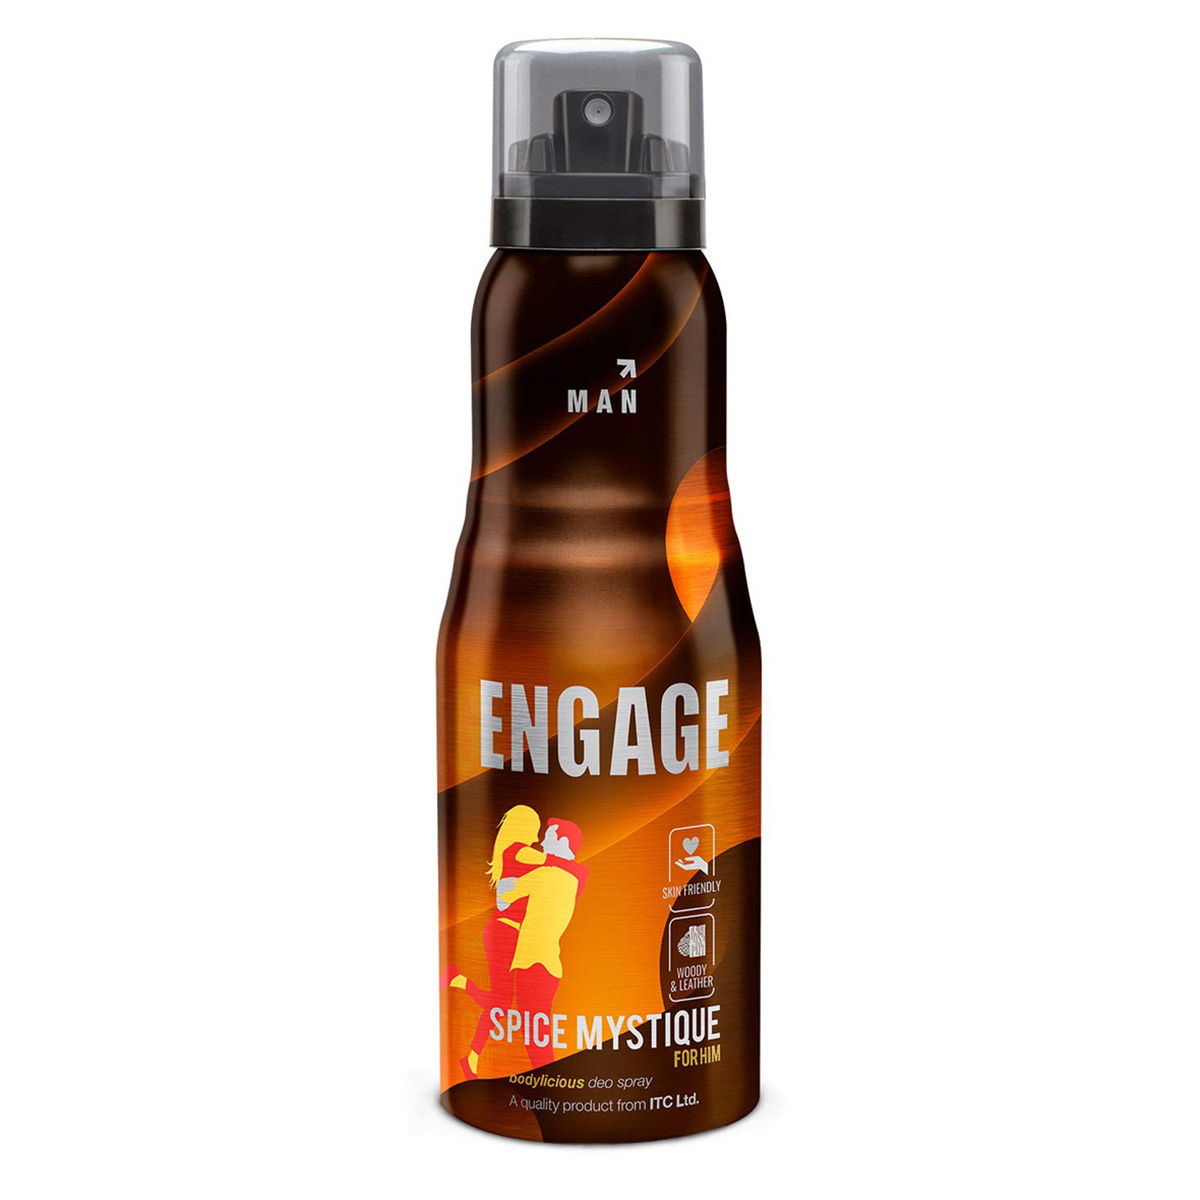 Engage Spice Mystique Bodylicious Deo Spray for Men, 150 ml, Pack of 1 